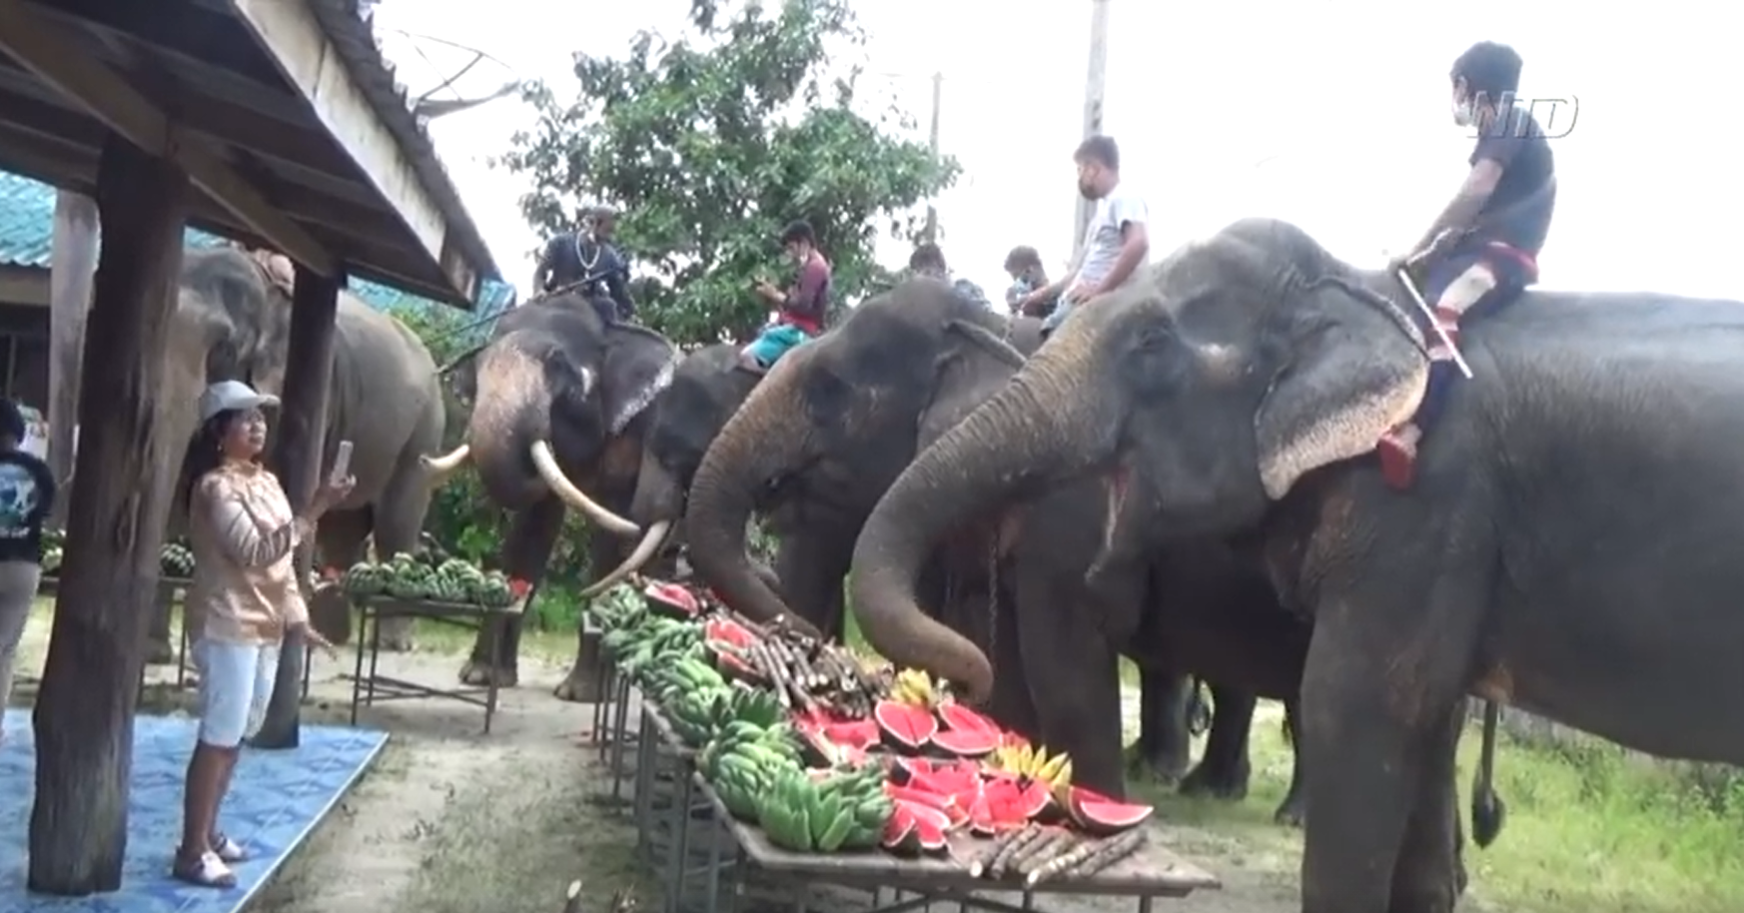 93-Year-Old Throws Birthday Party for Pet Elephants